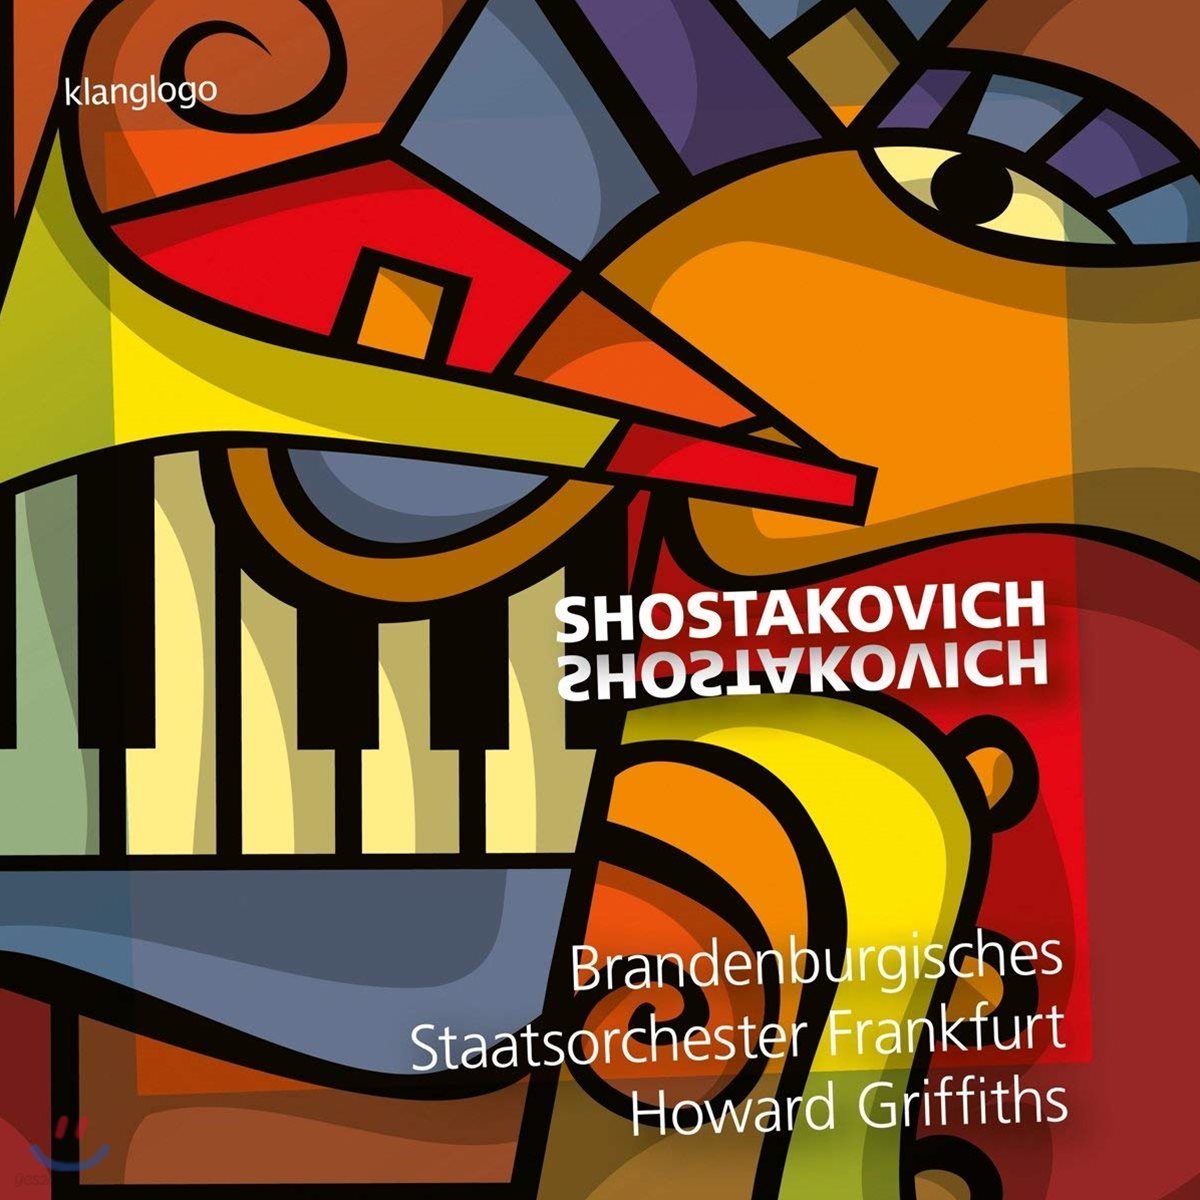 Howard Griffiths 쇼스타코비치: 피아노 협주곡 1번, 재즈 모음곡 2번, 황금 시대 (Shostakovich: Concerto for Piano, Suite for Jazz Orchestra No. 2, The Golden Age)